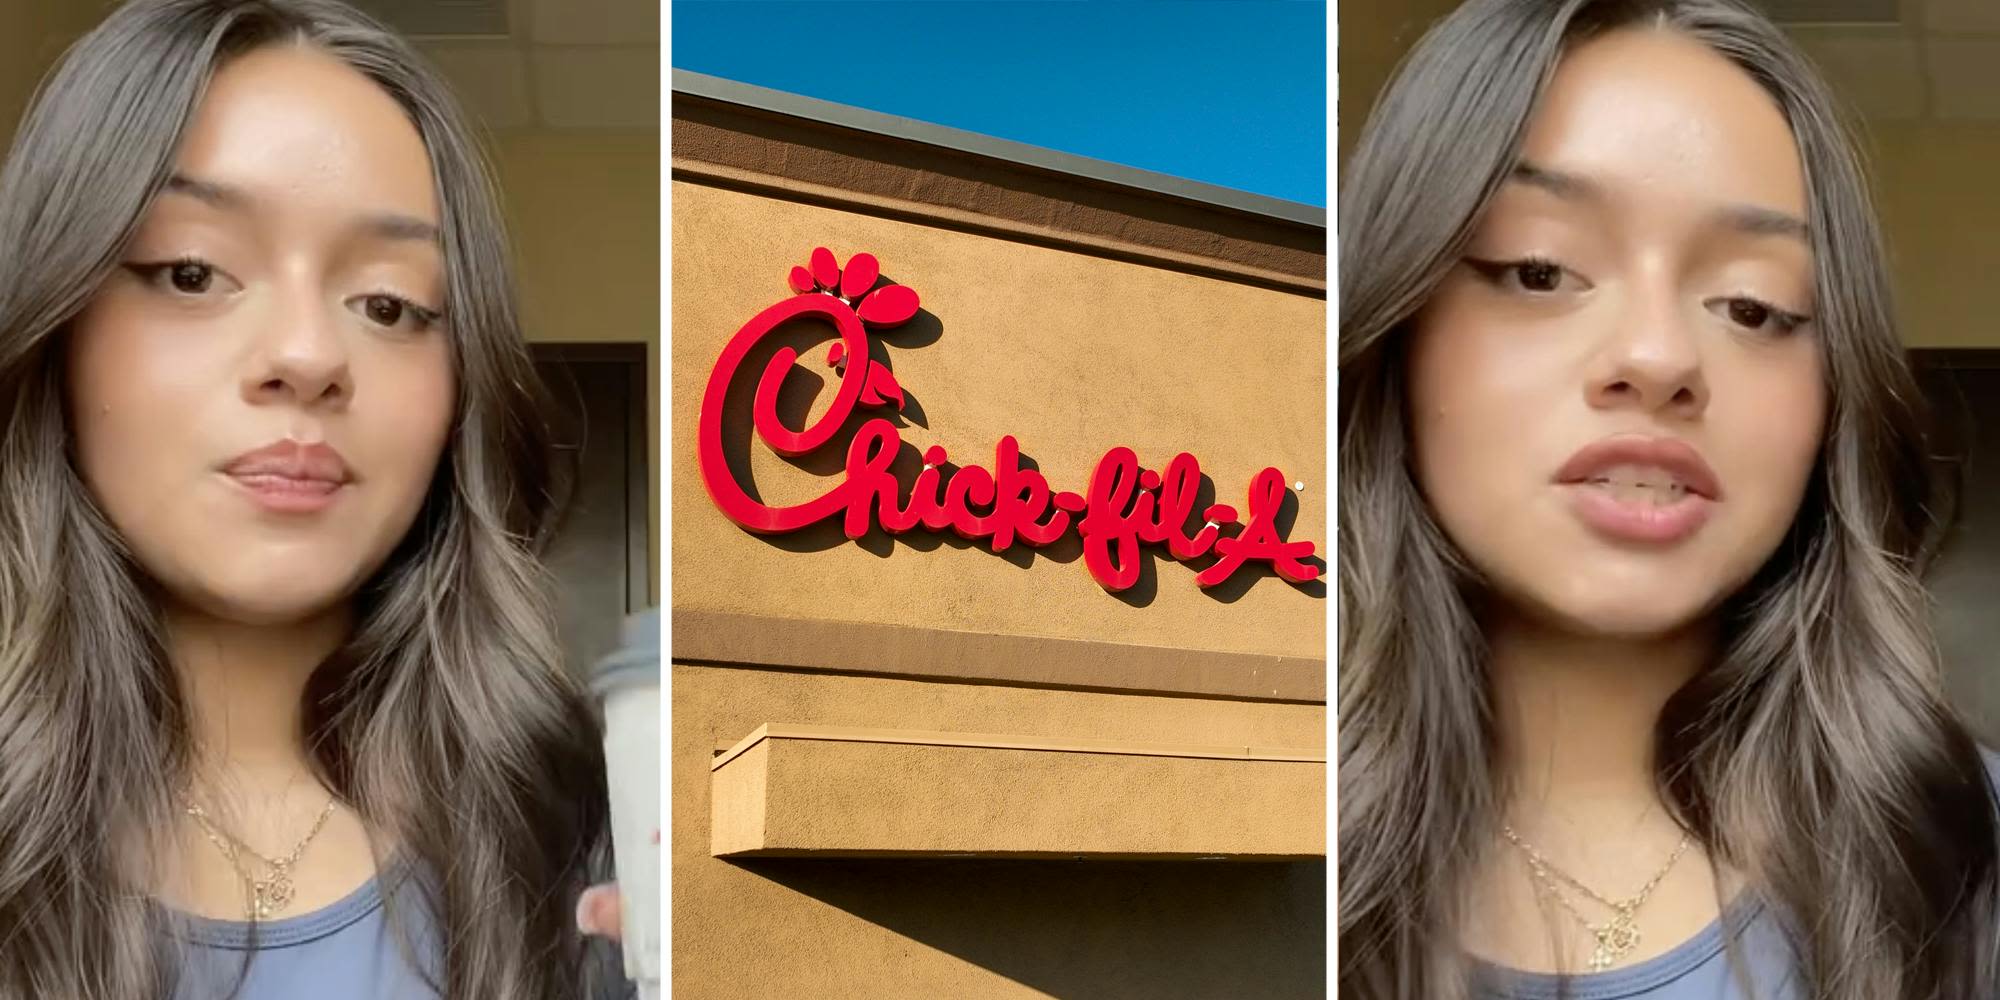 ‘They wouldn’t give us free food and I would be there for 8 hours’: Ex-Chick-fil-A worker says she had to resort to getting free food through customers’ receipts